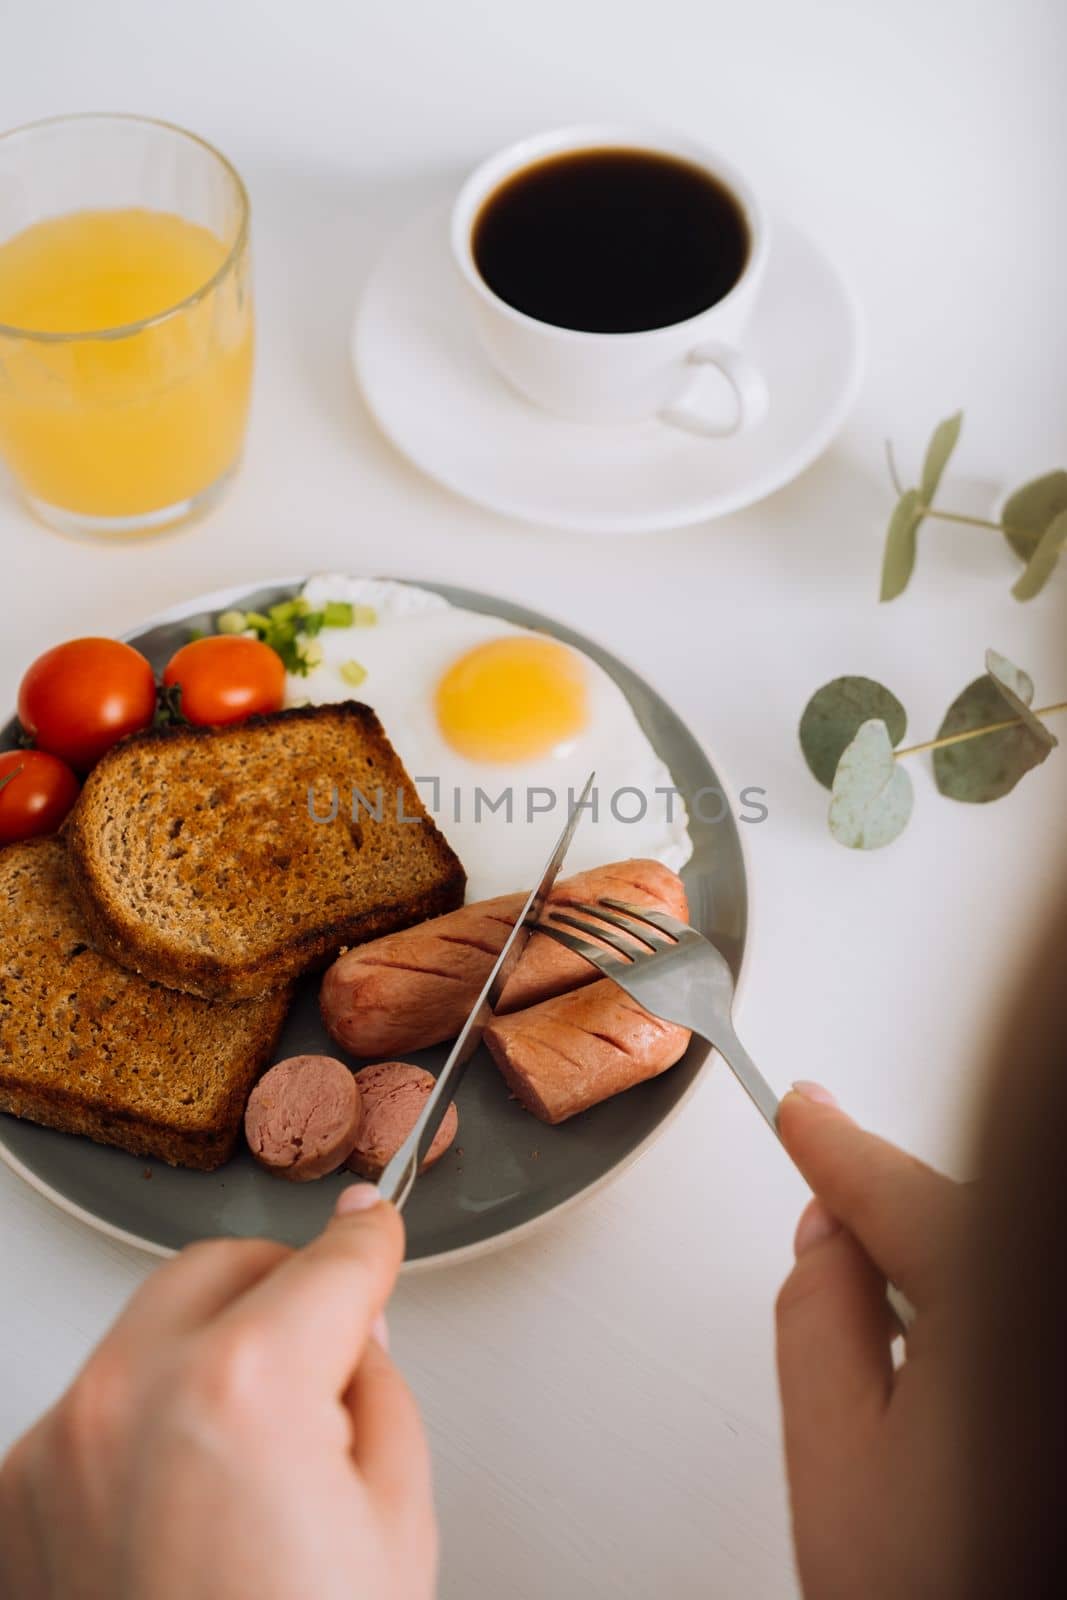 English breakfast with black coffee and orange juice, grilled sausage and whole wheat toast with fried egg and cherry tomatoes on plate